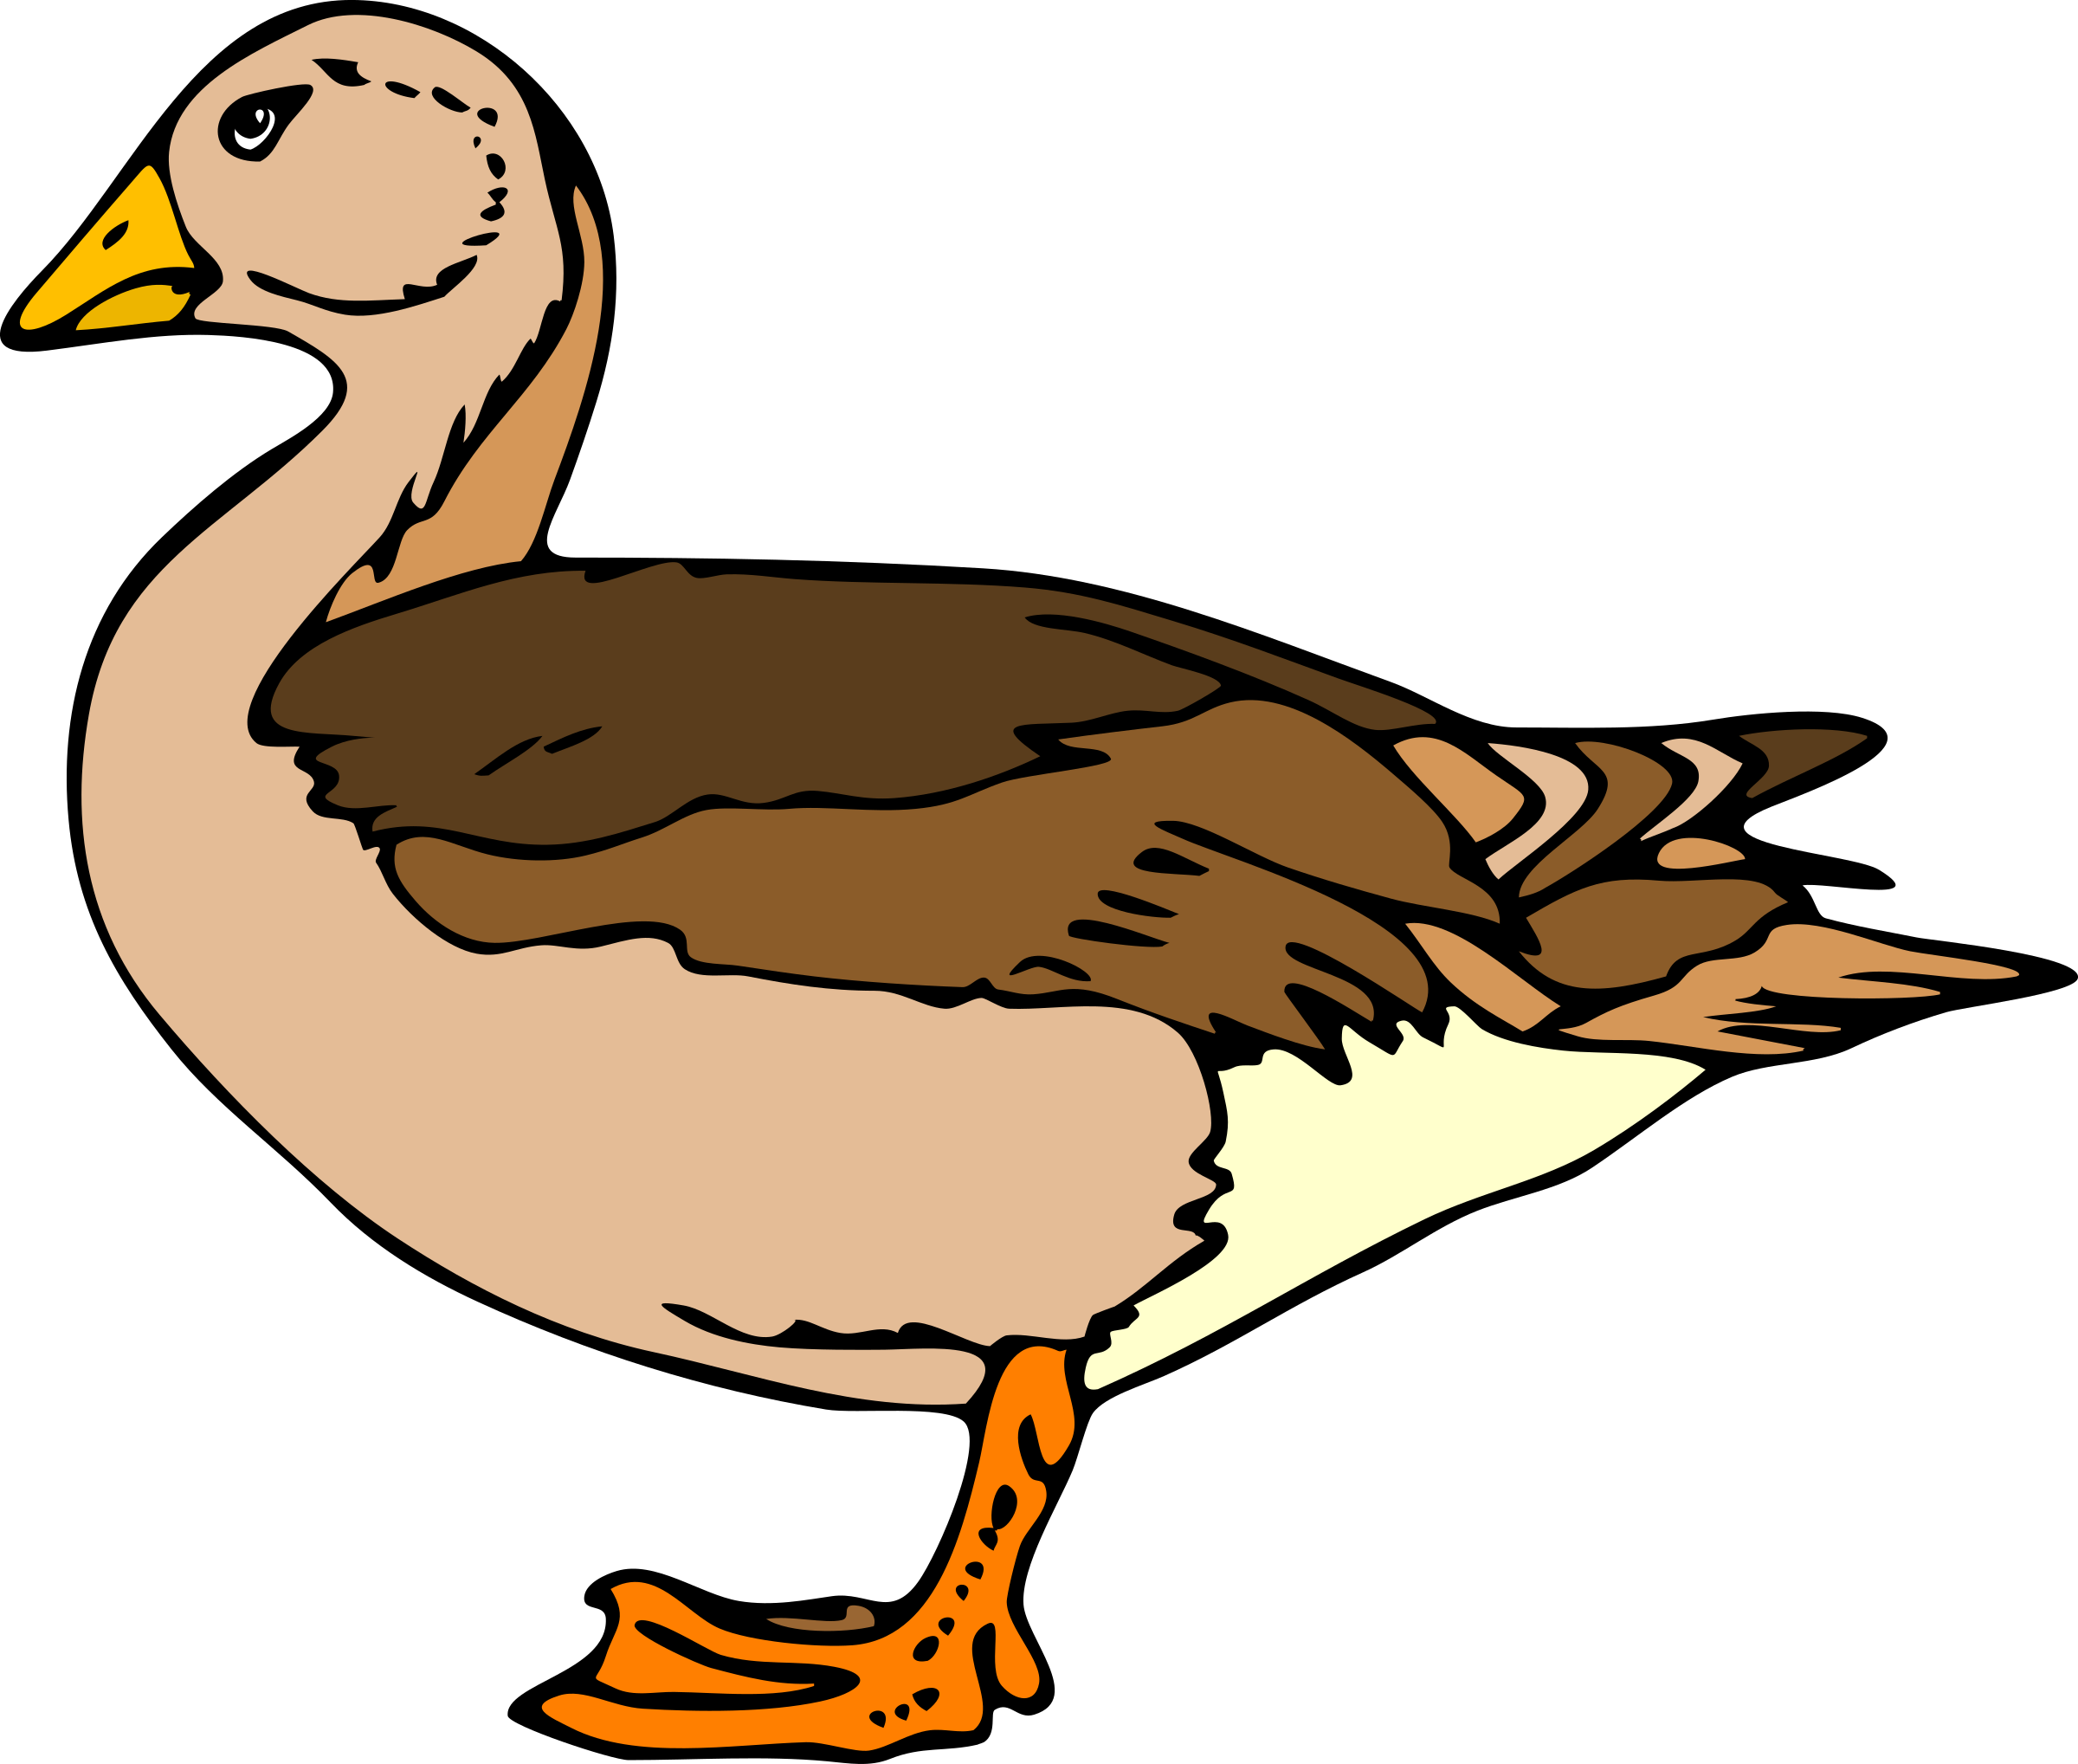 Clipart duck side view. Frames illustrations hd images